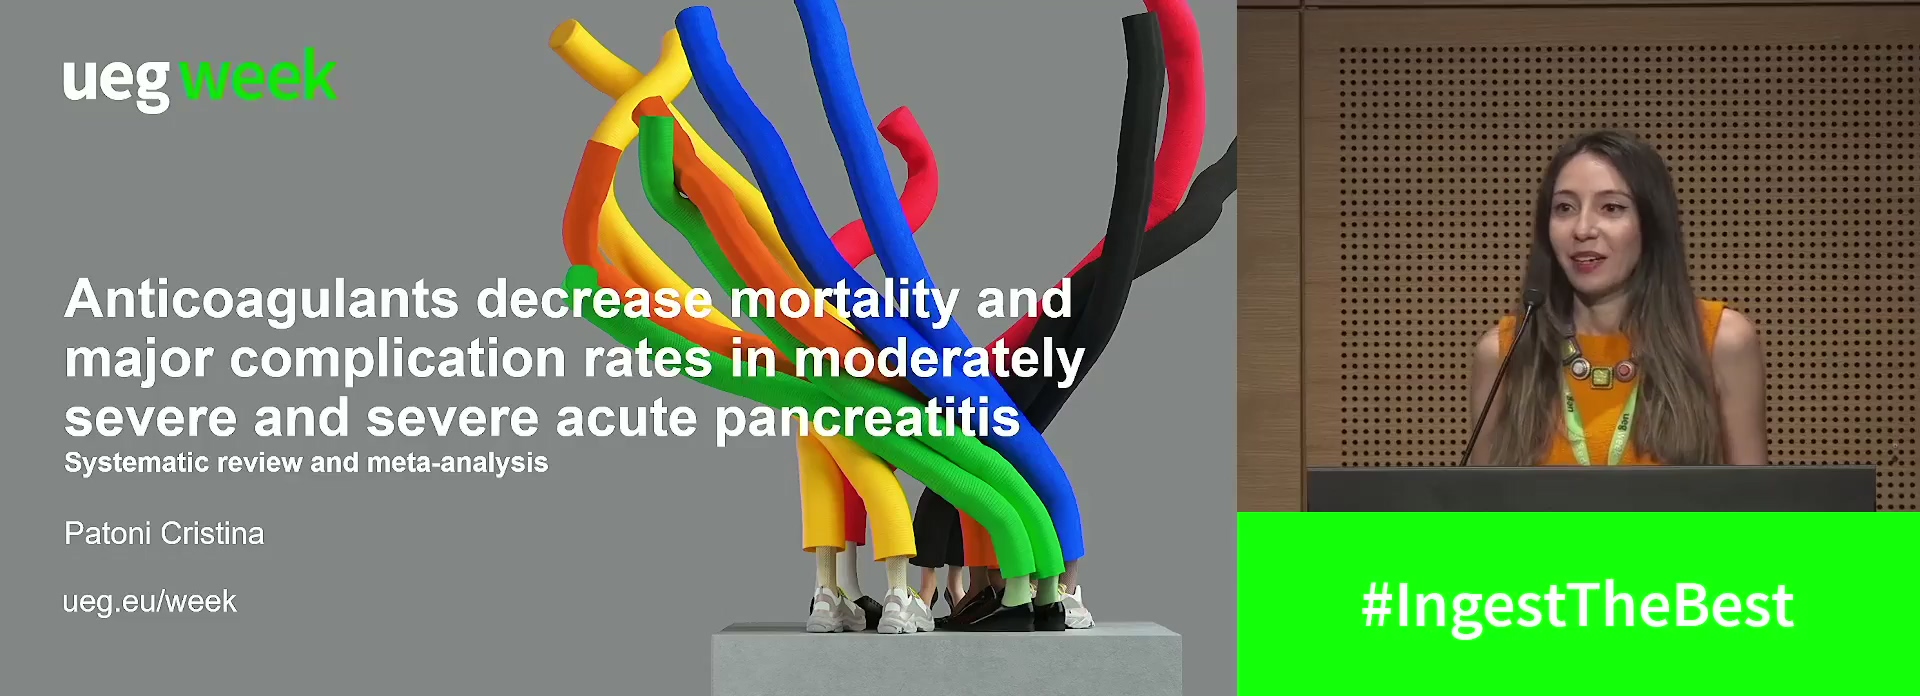 ANTICOAGULANTS DECREASE MORTALITY AND MAJOR COMPLICATION RATES IN MODERATELY SEVERE AND SEVERE ACUTE PANCREATITIS – A SYSTEMATIC REVIEW AND META-ANALYSIS